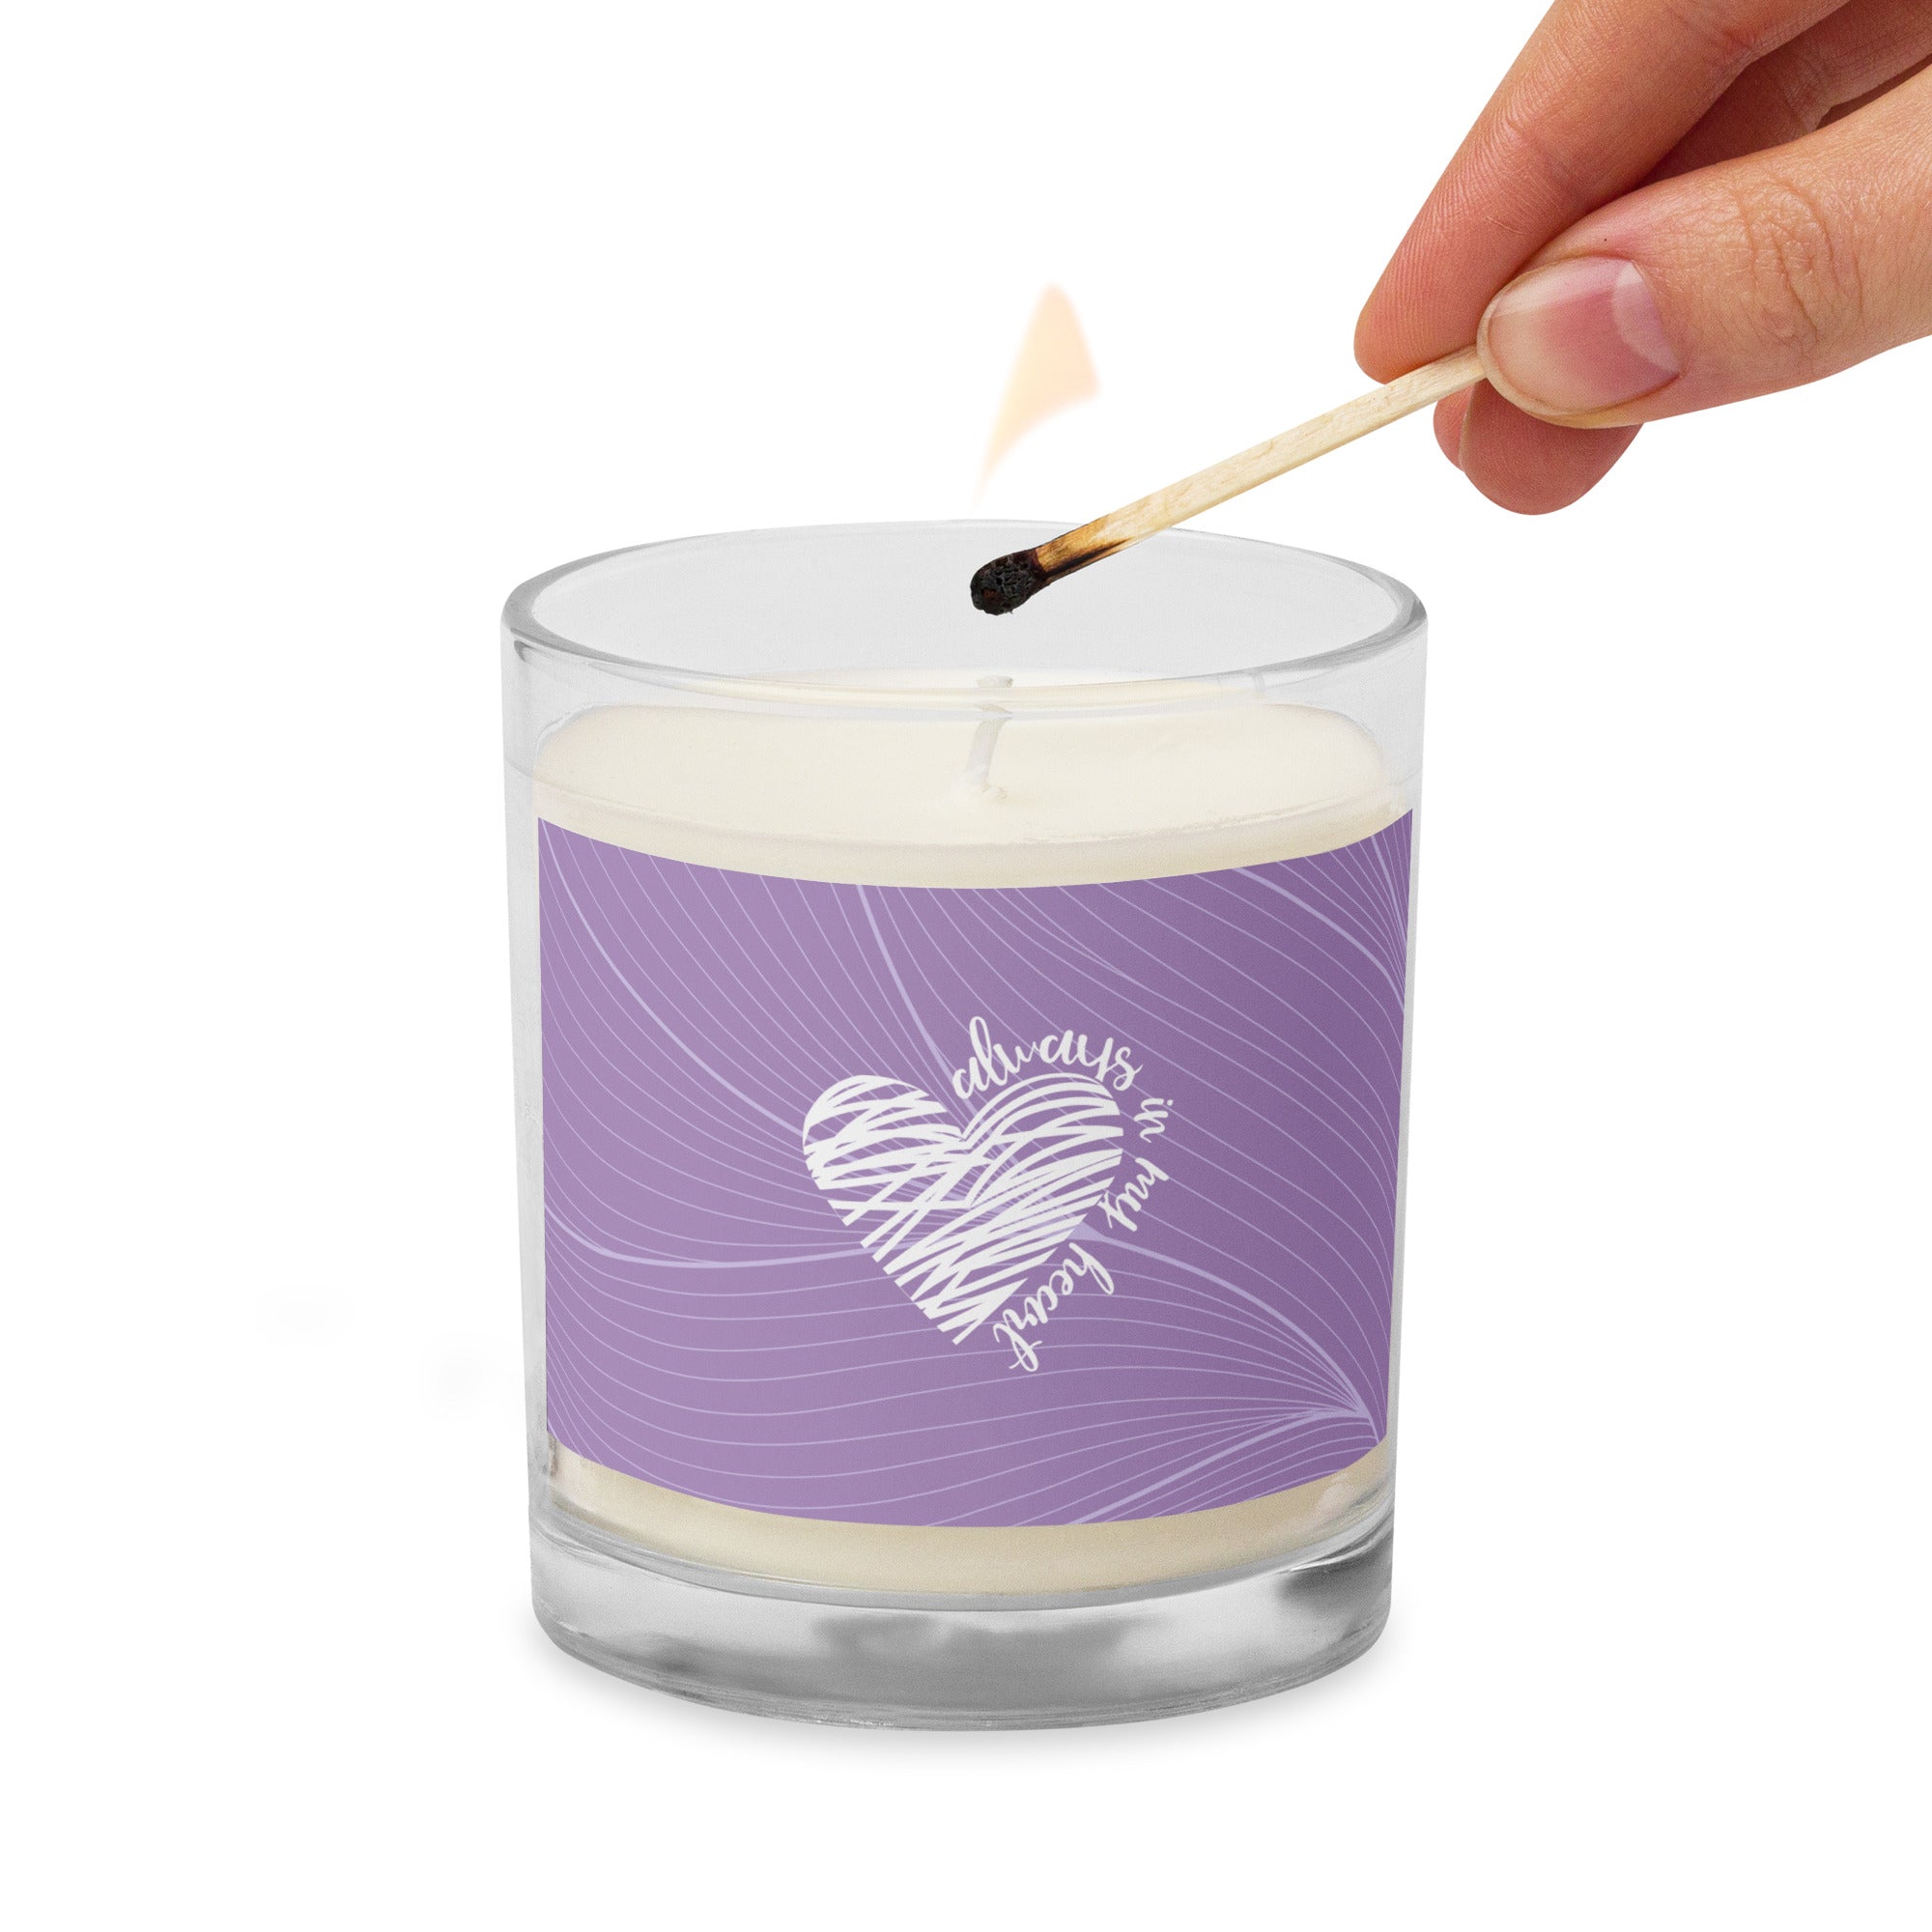 Always In My Heart soy wax candle